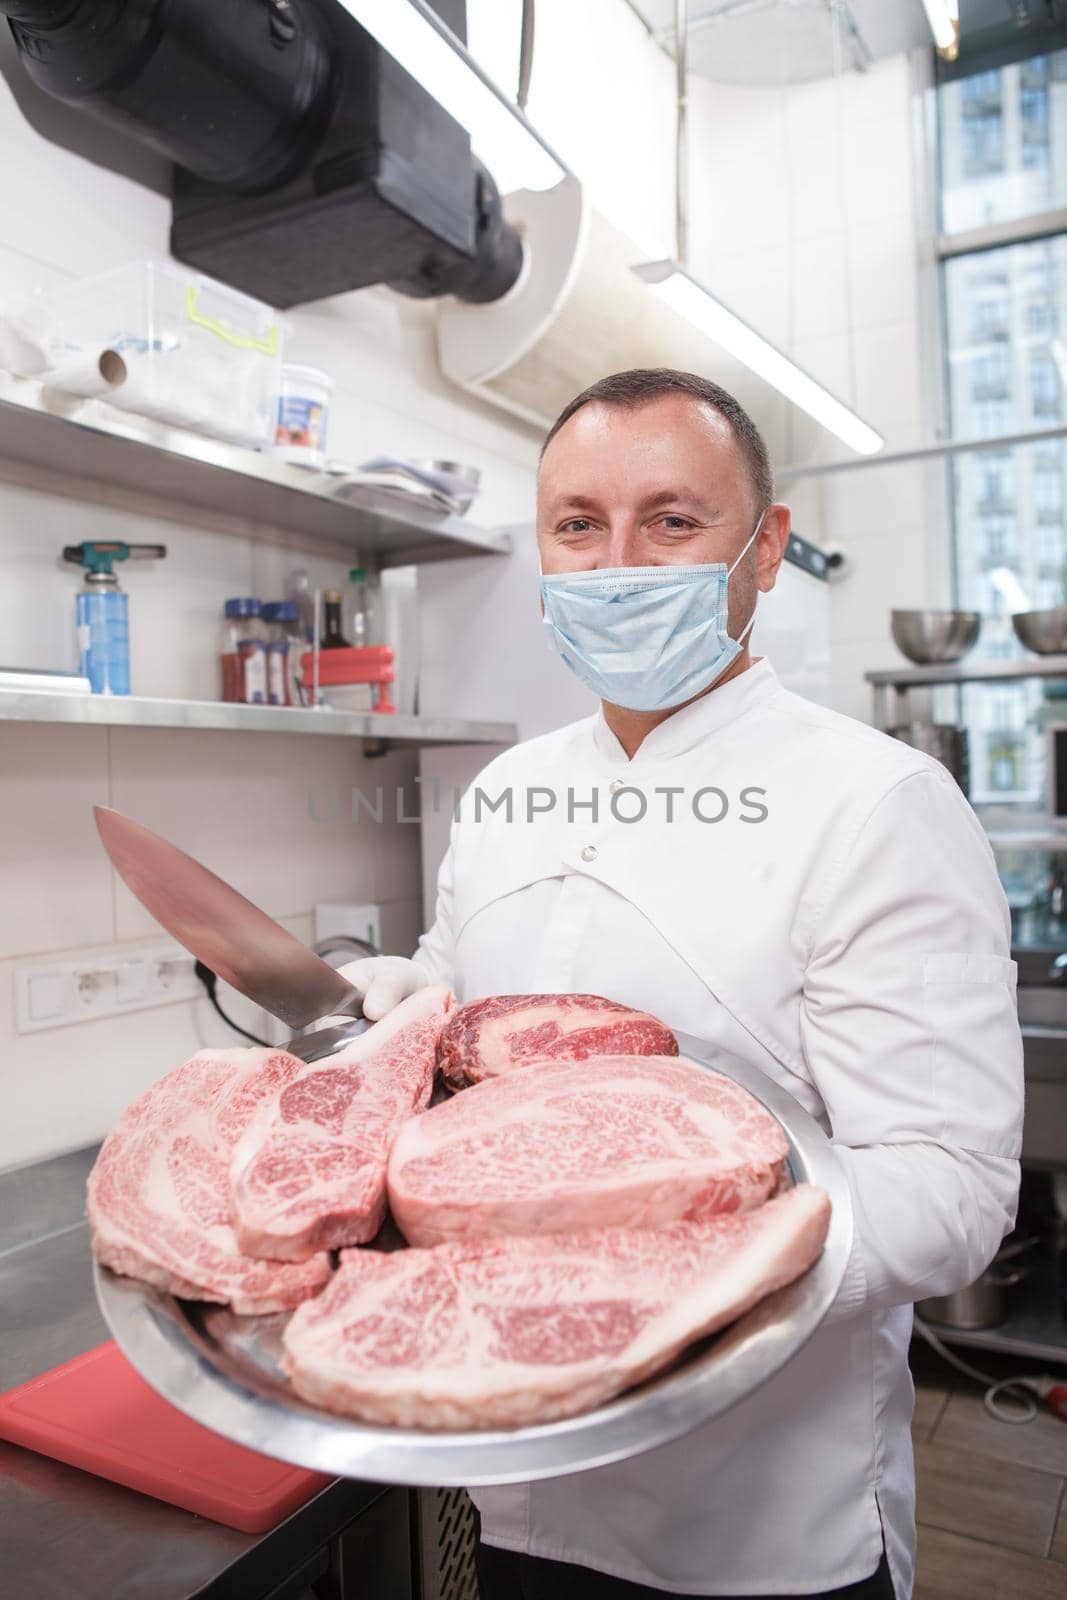 Vertical shot of a professional chef wearing face mask, carrying beef steaks on a tray